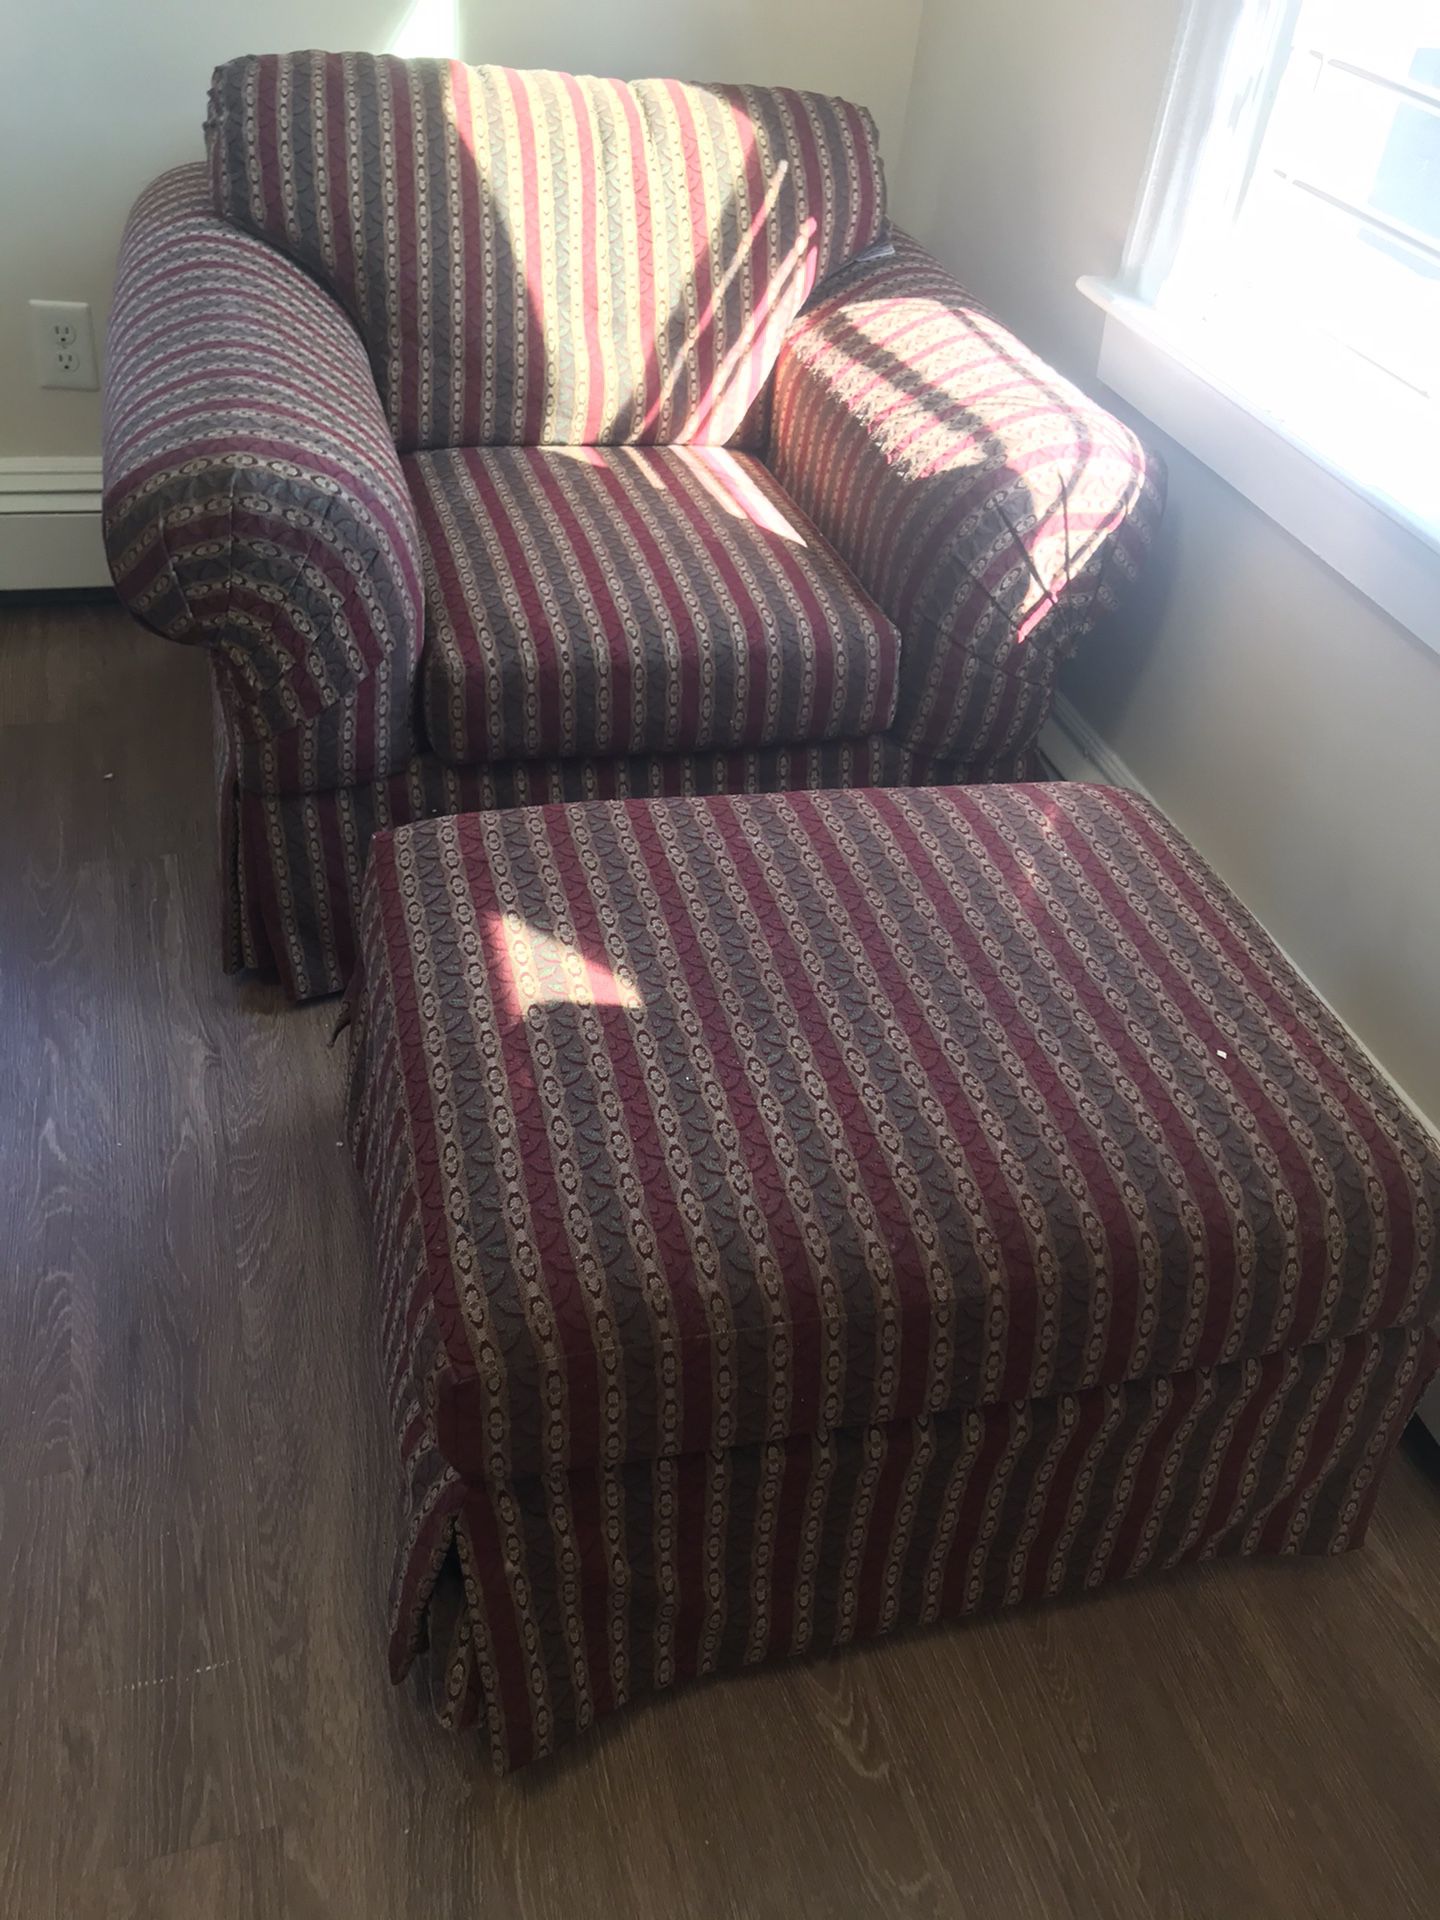 Domain chair with ottoman